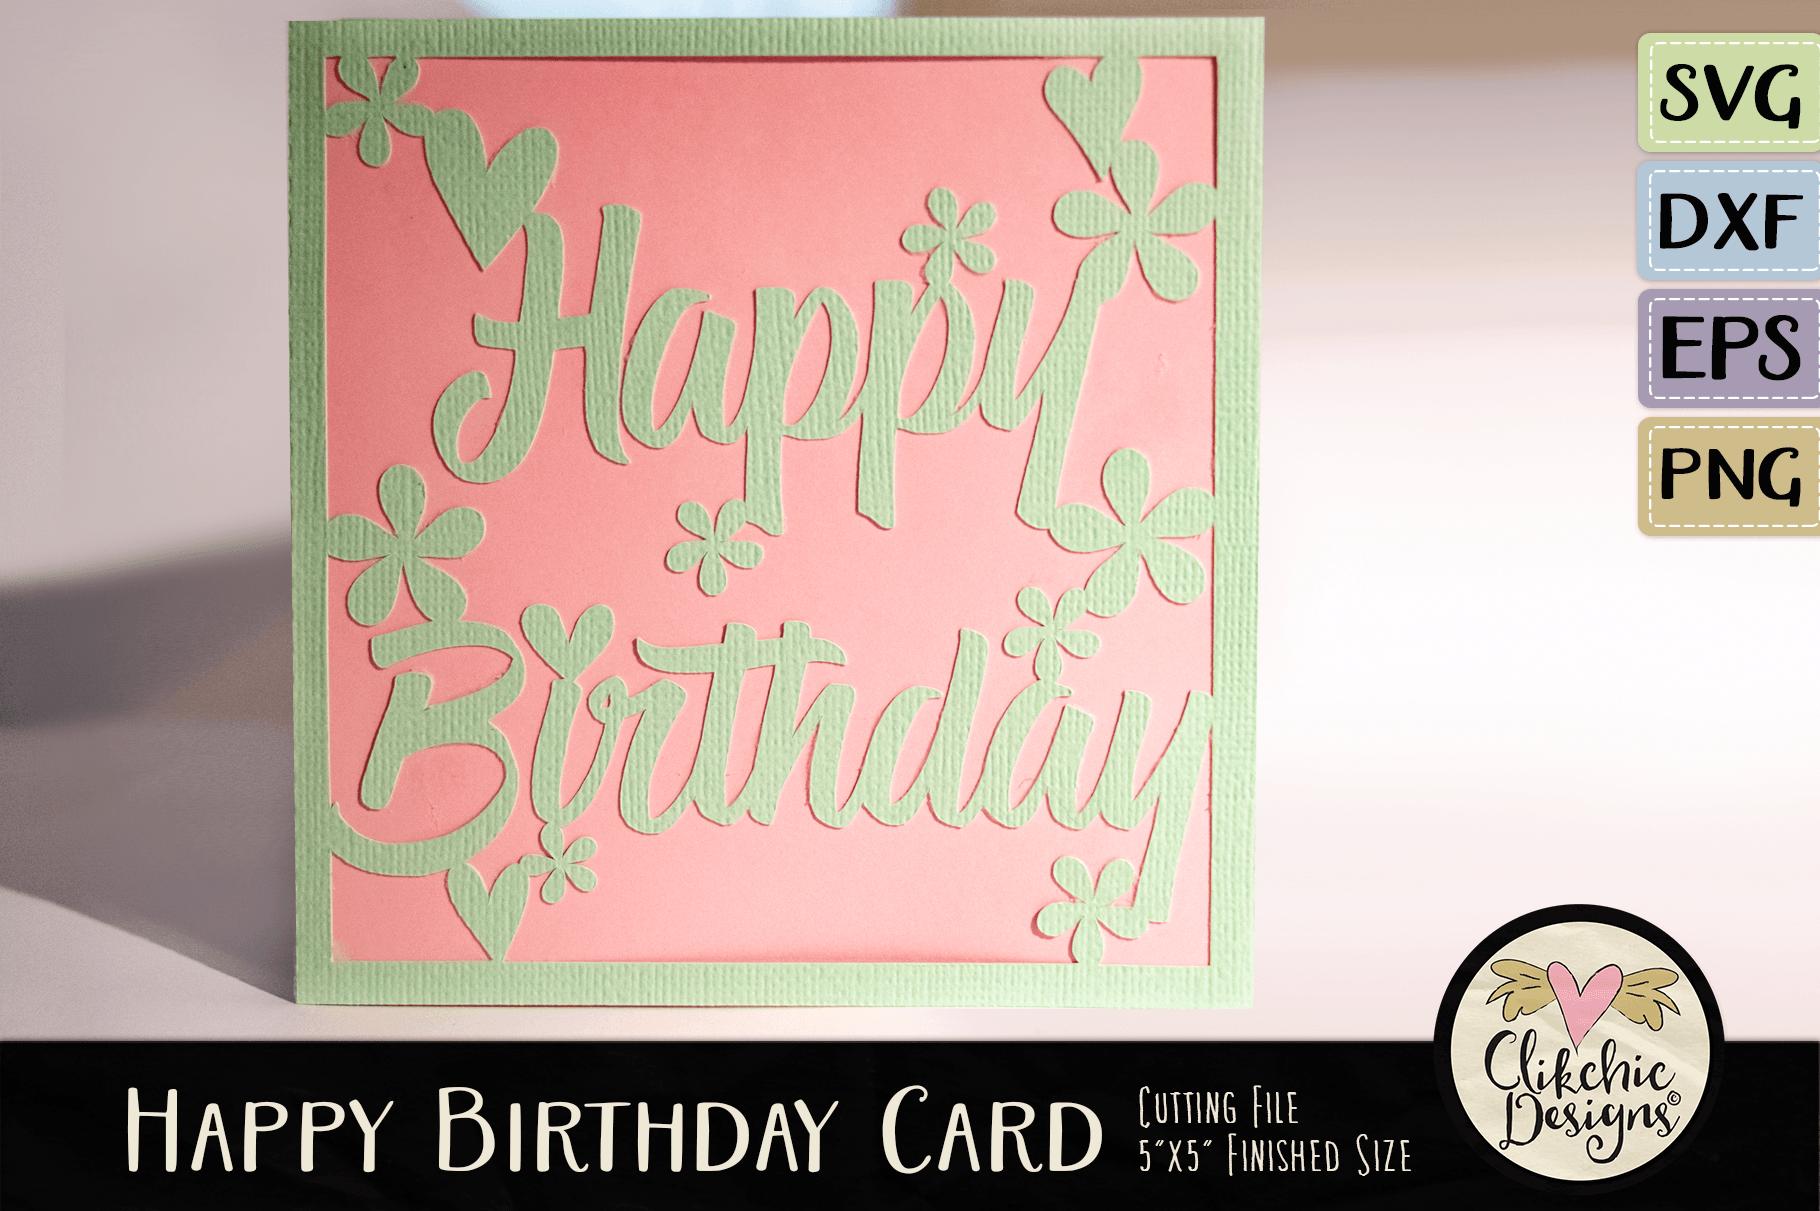 Floral Happy Birthday Card SVG Cutting File By Clikchic Designs